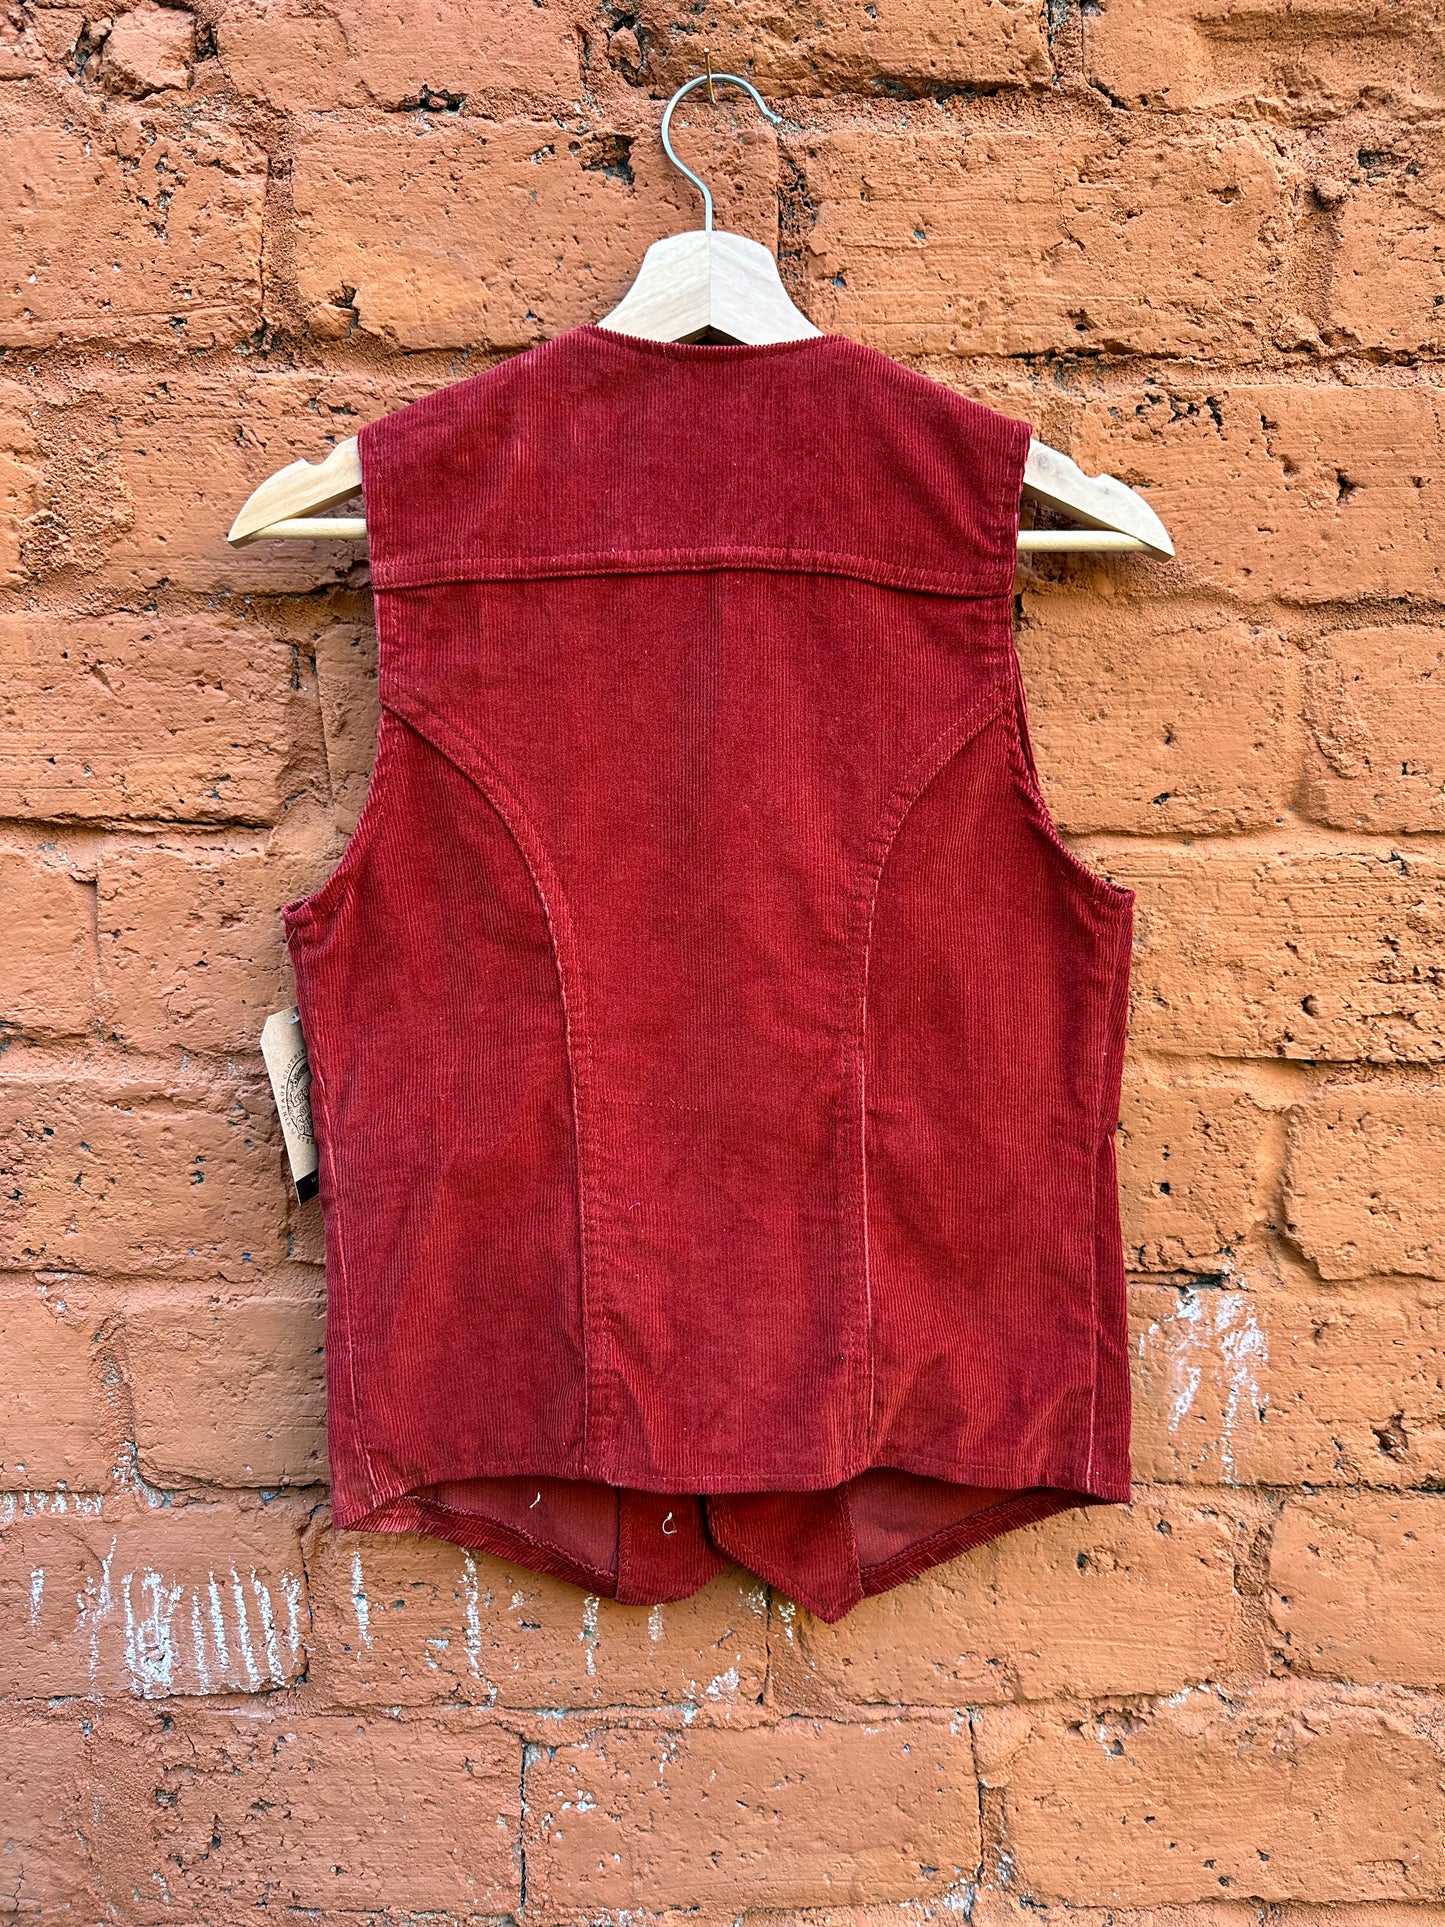 Wrangler Rust Red Corduroy Vest - Deadstock with Tags